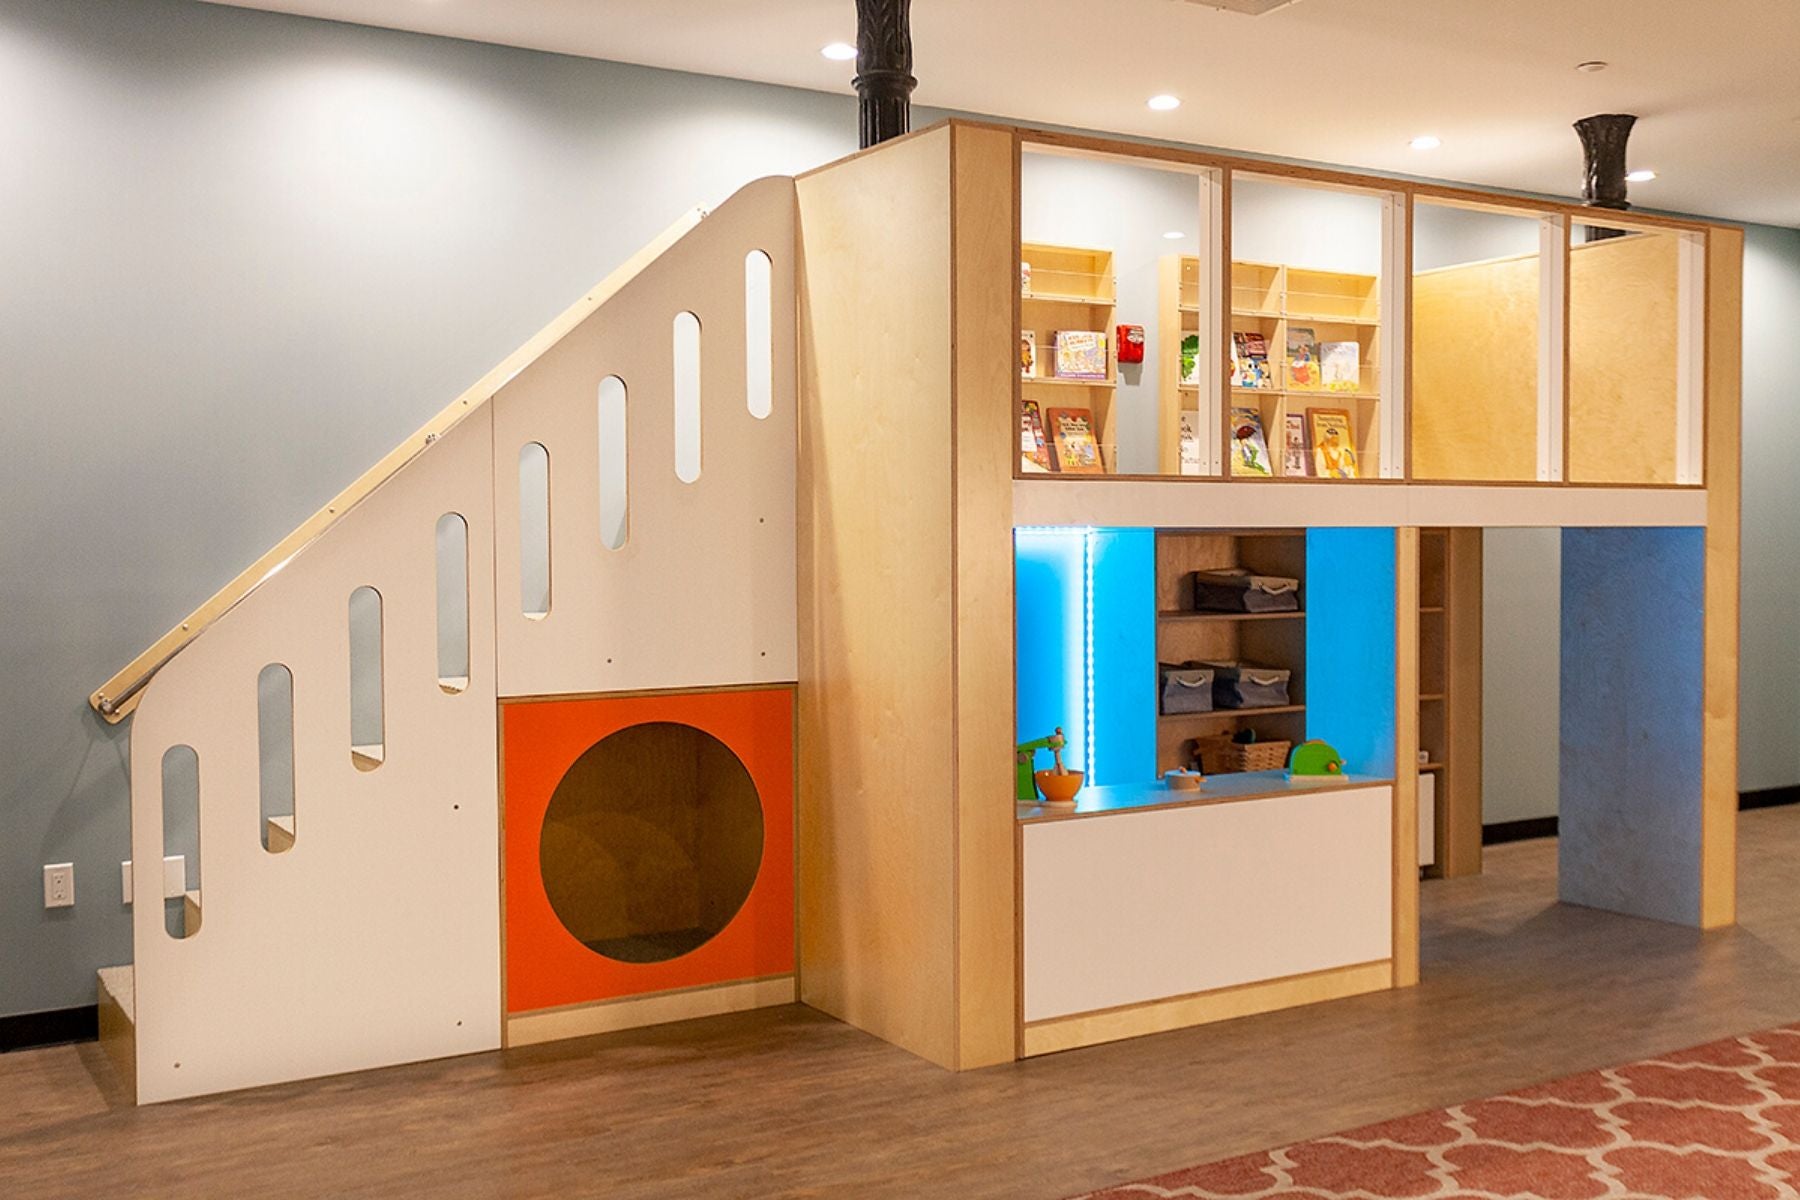 Colorful indoor wooden playhouse with stairs and storage.